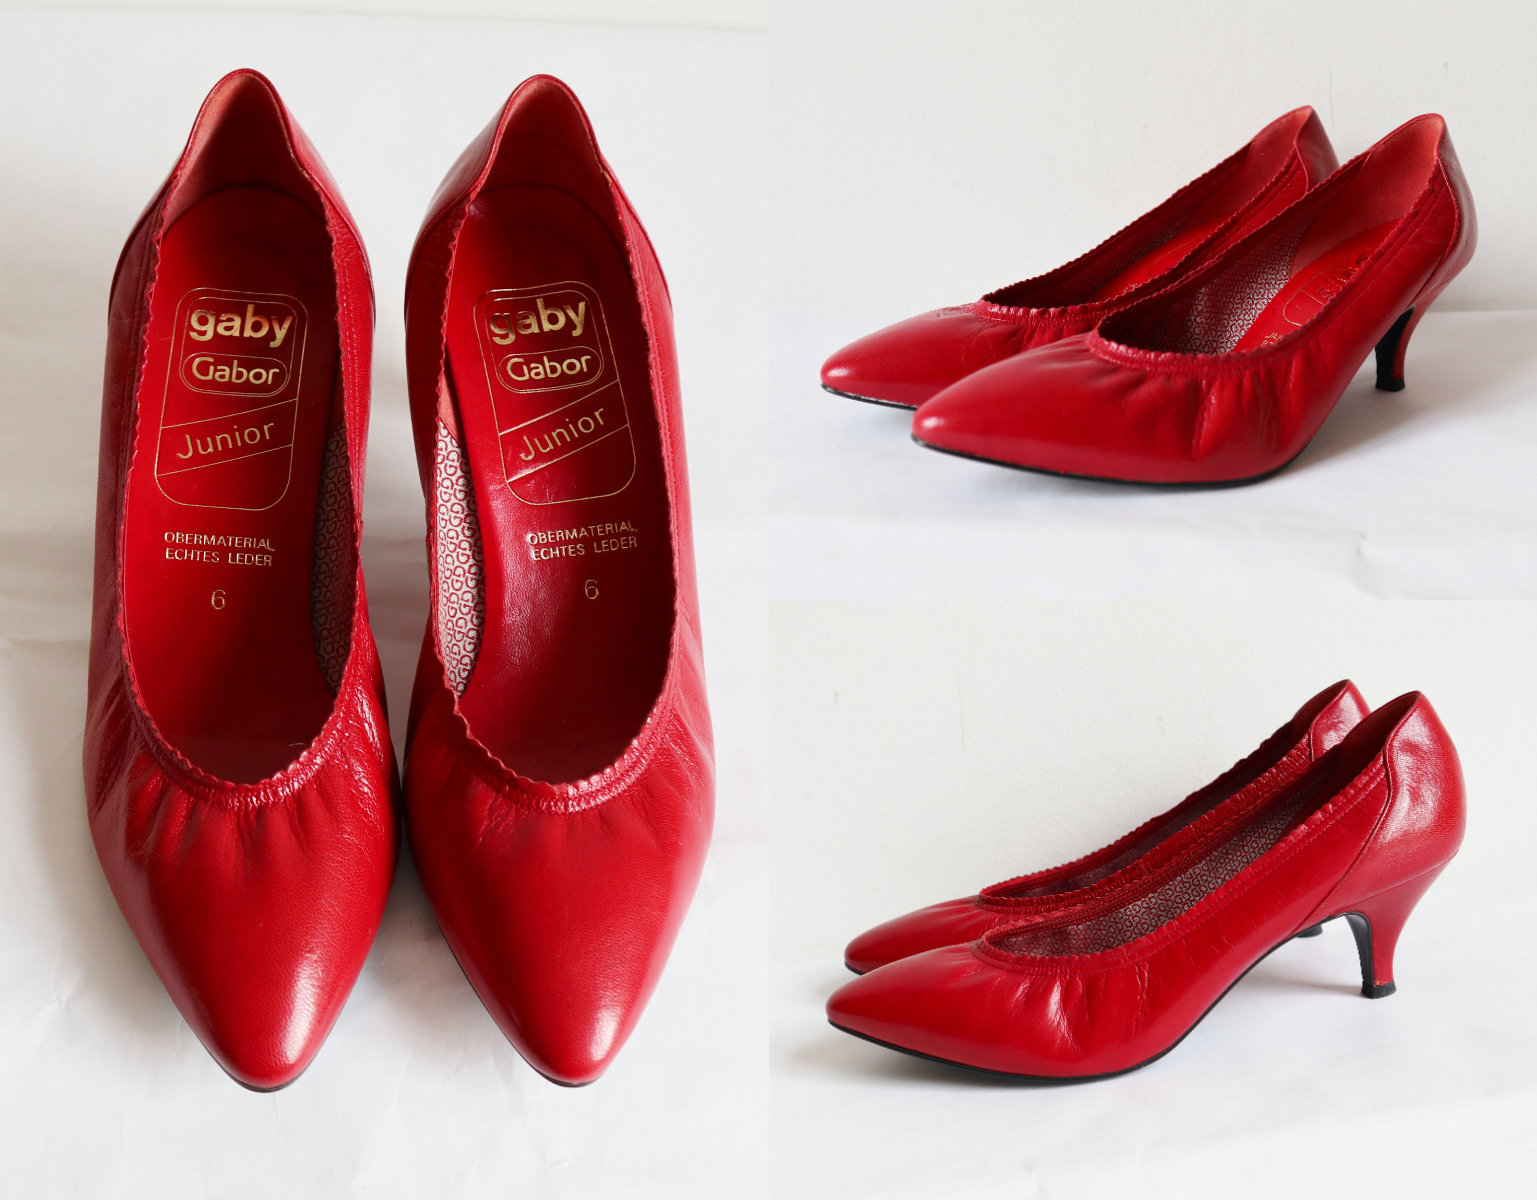 Tag det op Kilde tynd Beautiful Red 80s Leather Pumps // Gabor // Gaby Junior // | Etsy